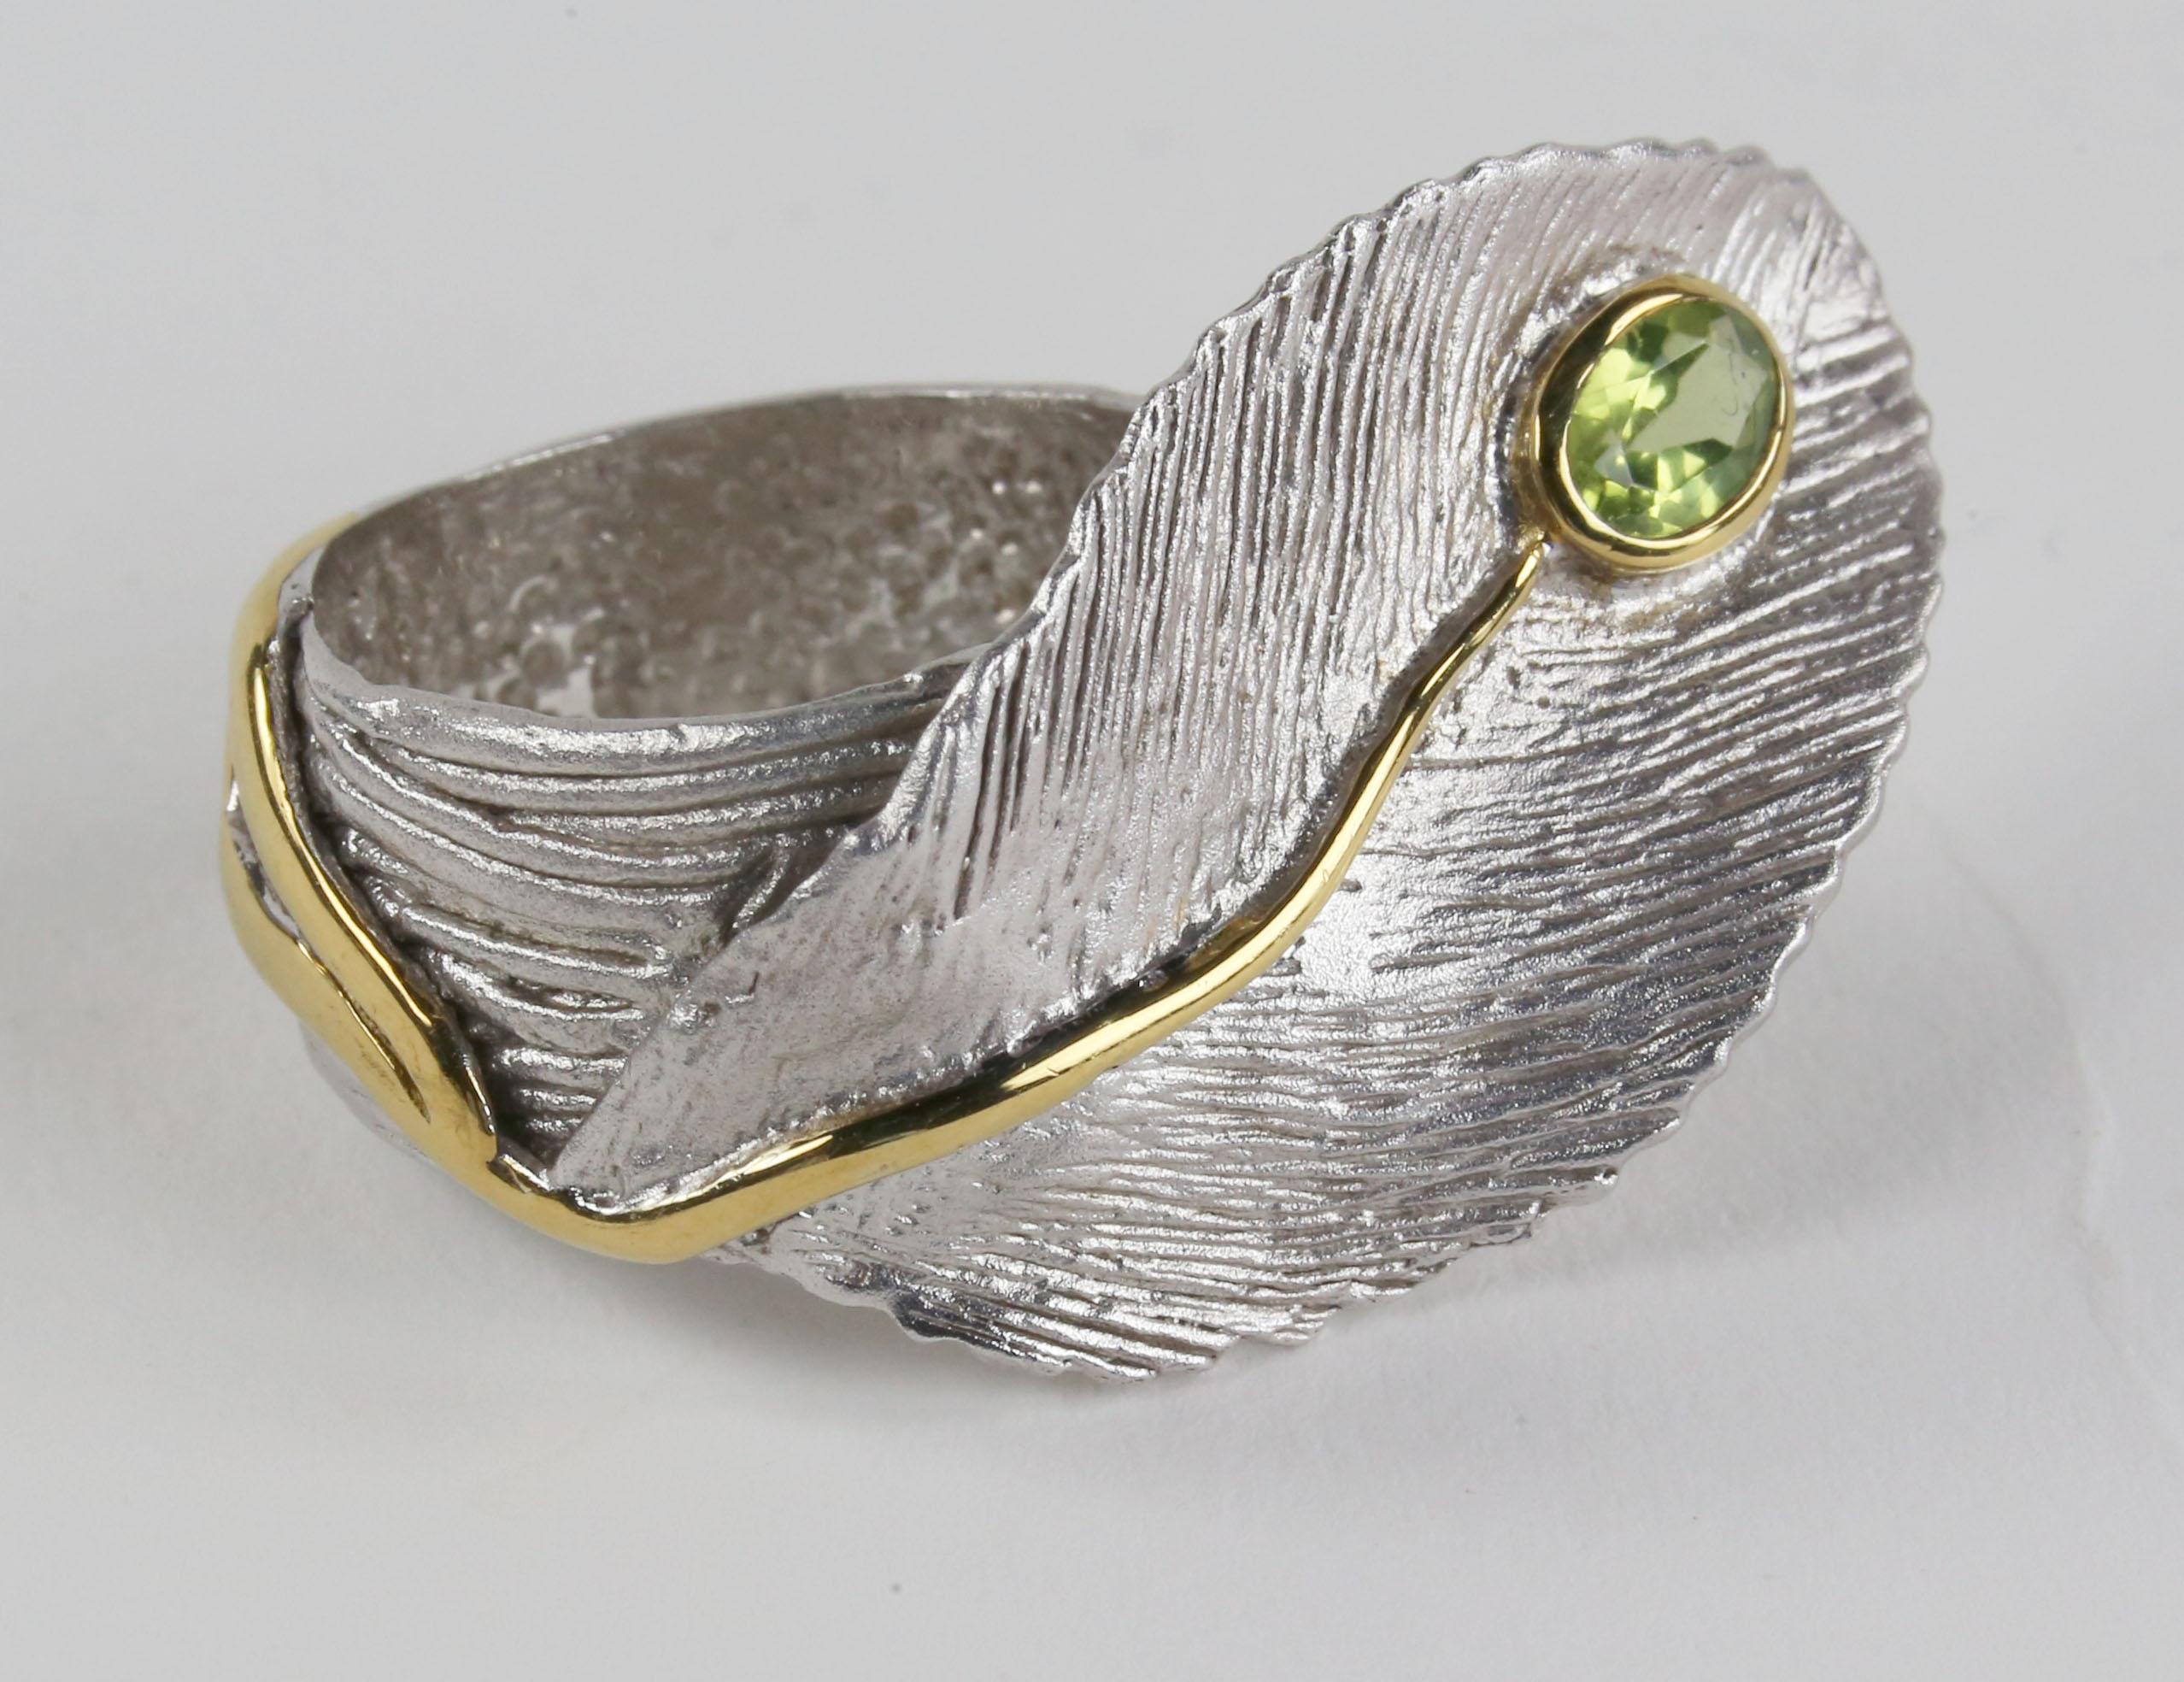 Dynamic and Stylish crafted in Rhodium tarnish resistant Sterling Silver with 14k yellow gold accents. The ring makes a nice statement with its textured design and Peridot Gem Stone setting with 14K yellow Gold stem design accents. The ring is in